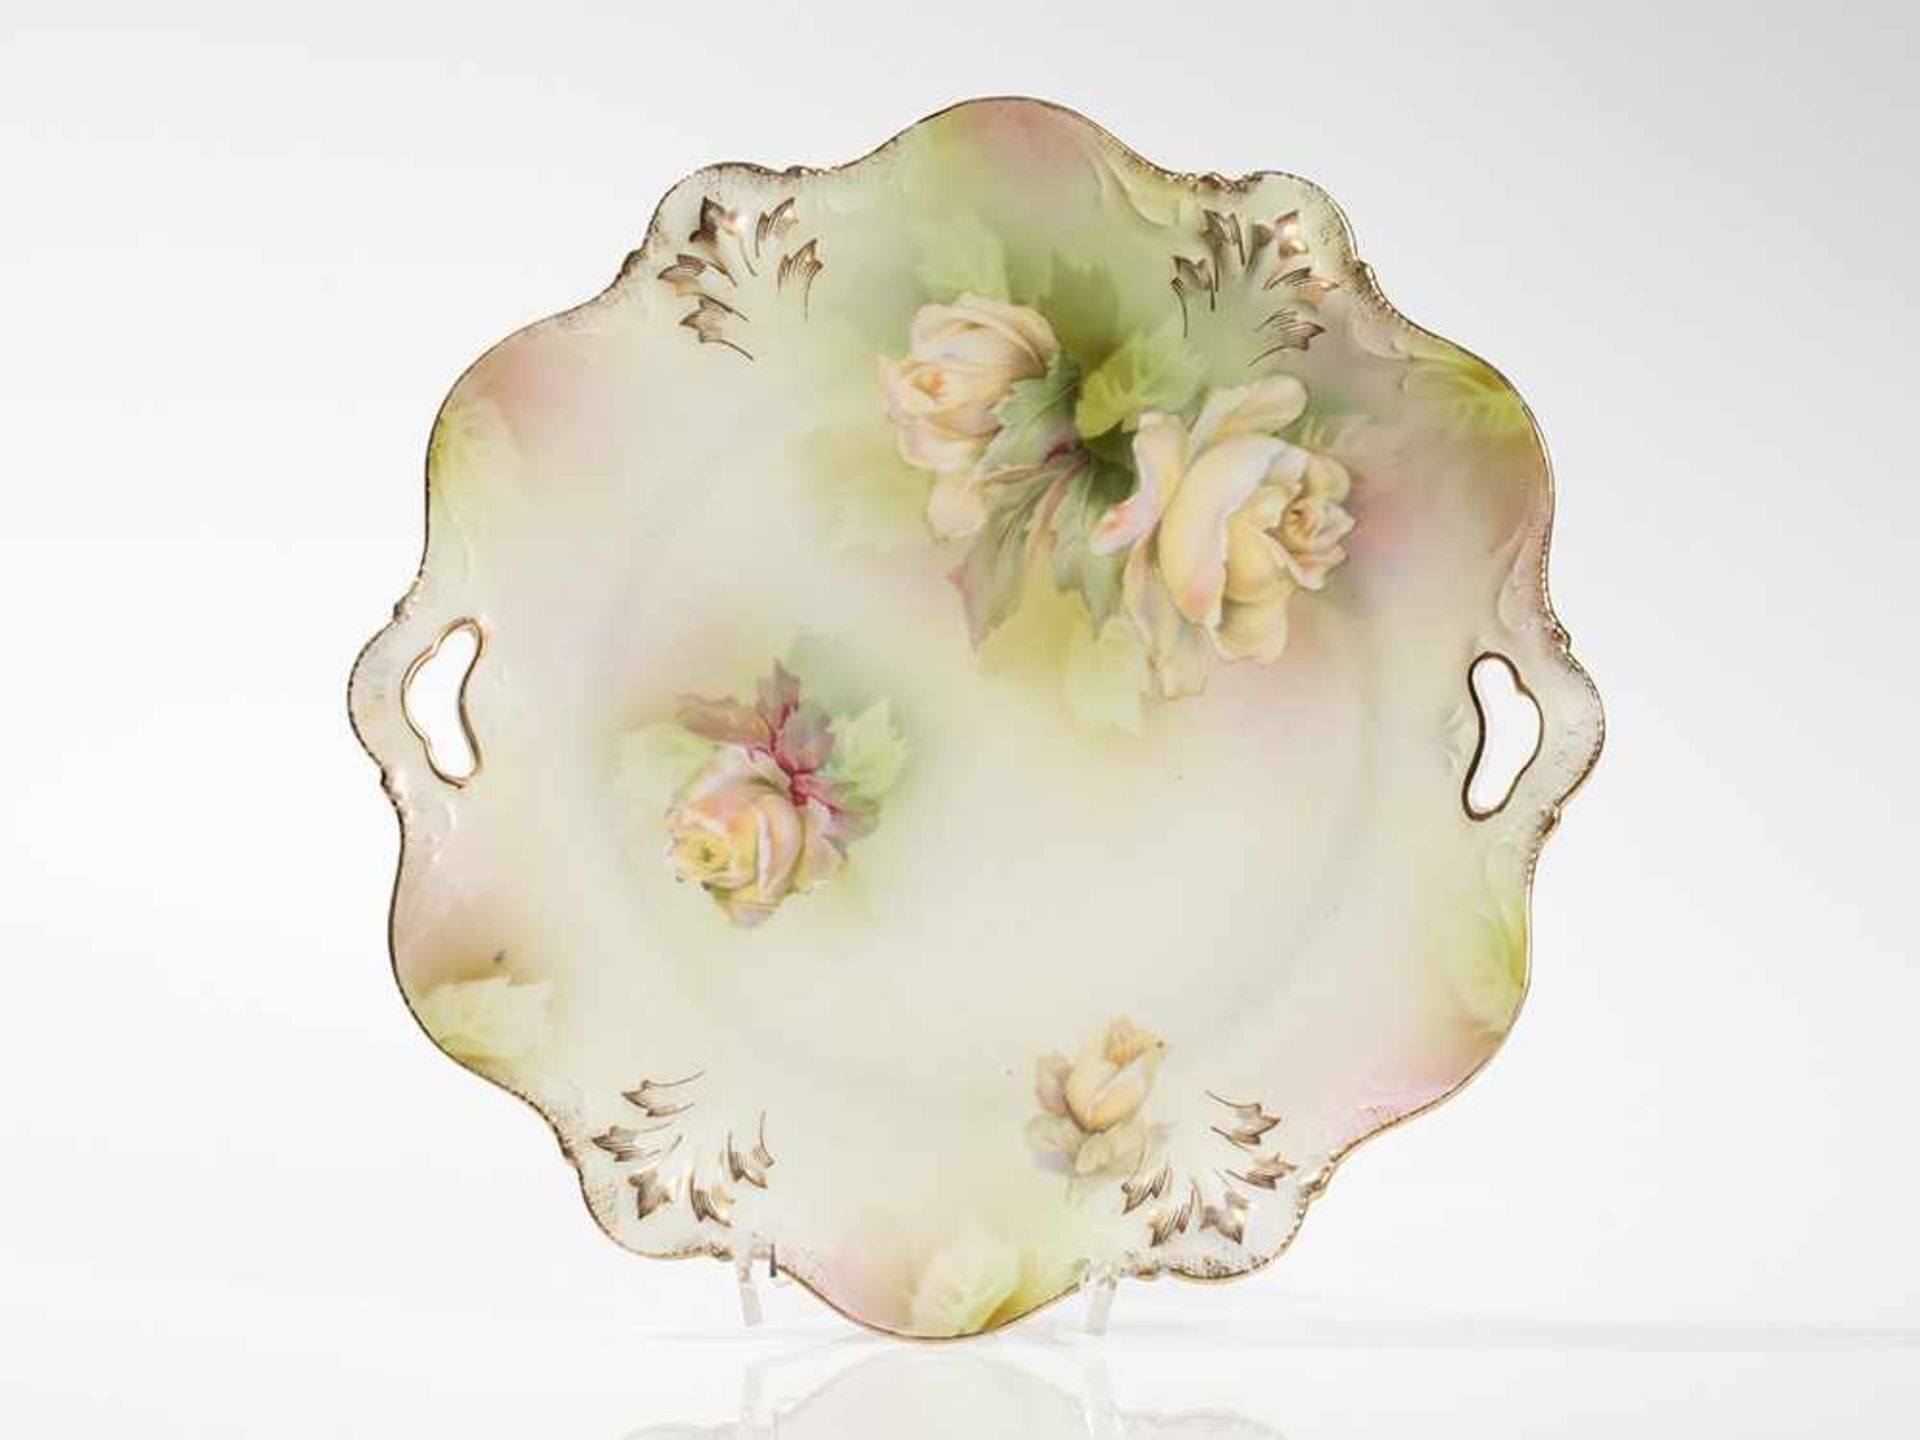 Confectionary Plate with Rose Décor by R.S. Prussia, ca. 1900 R.S. Prussia, Germany, around 1900